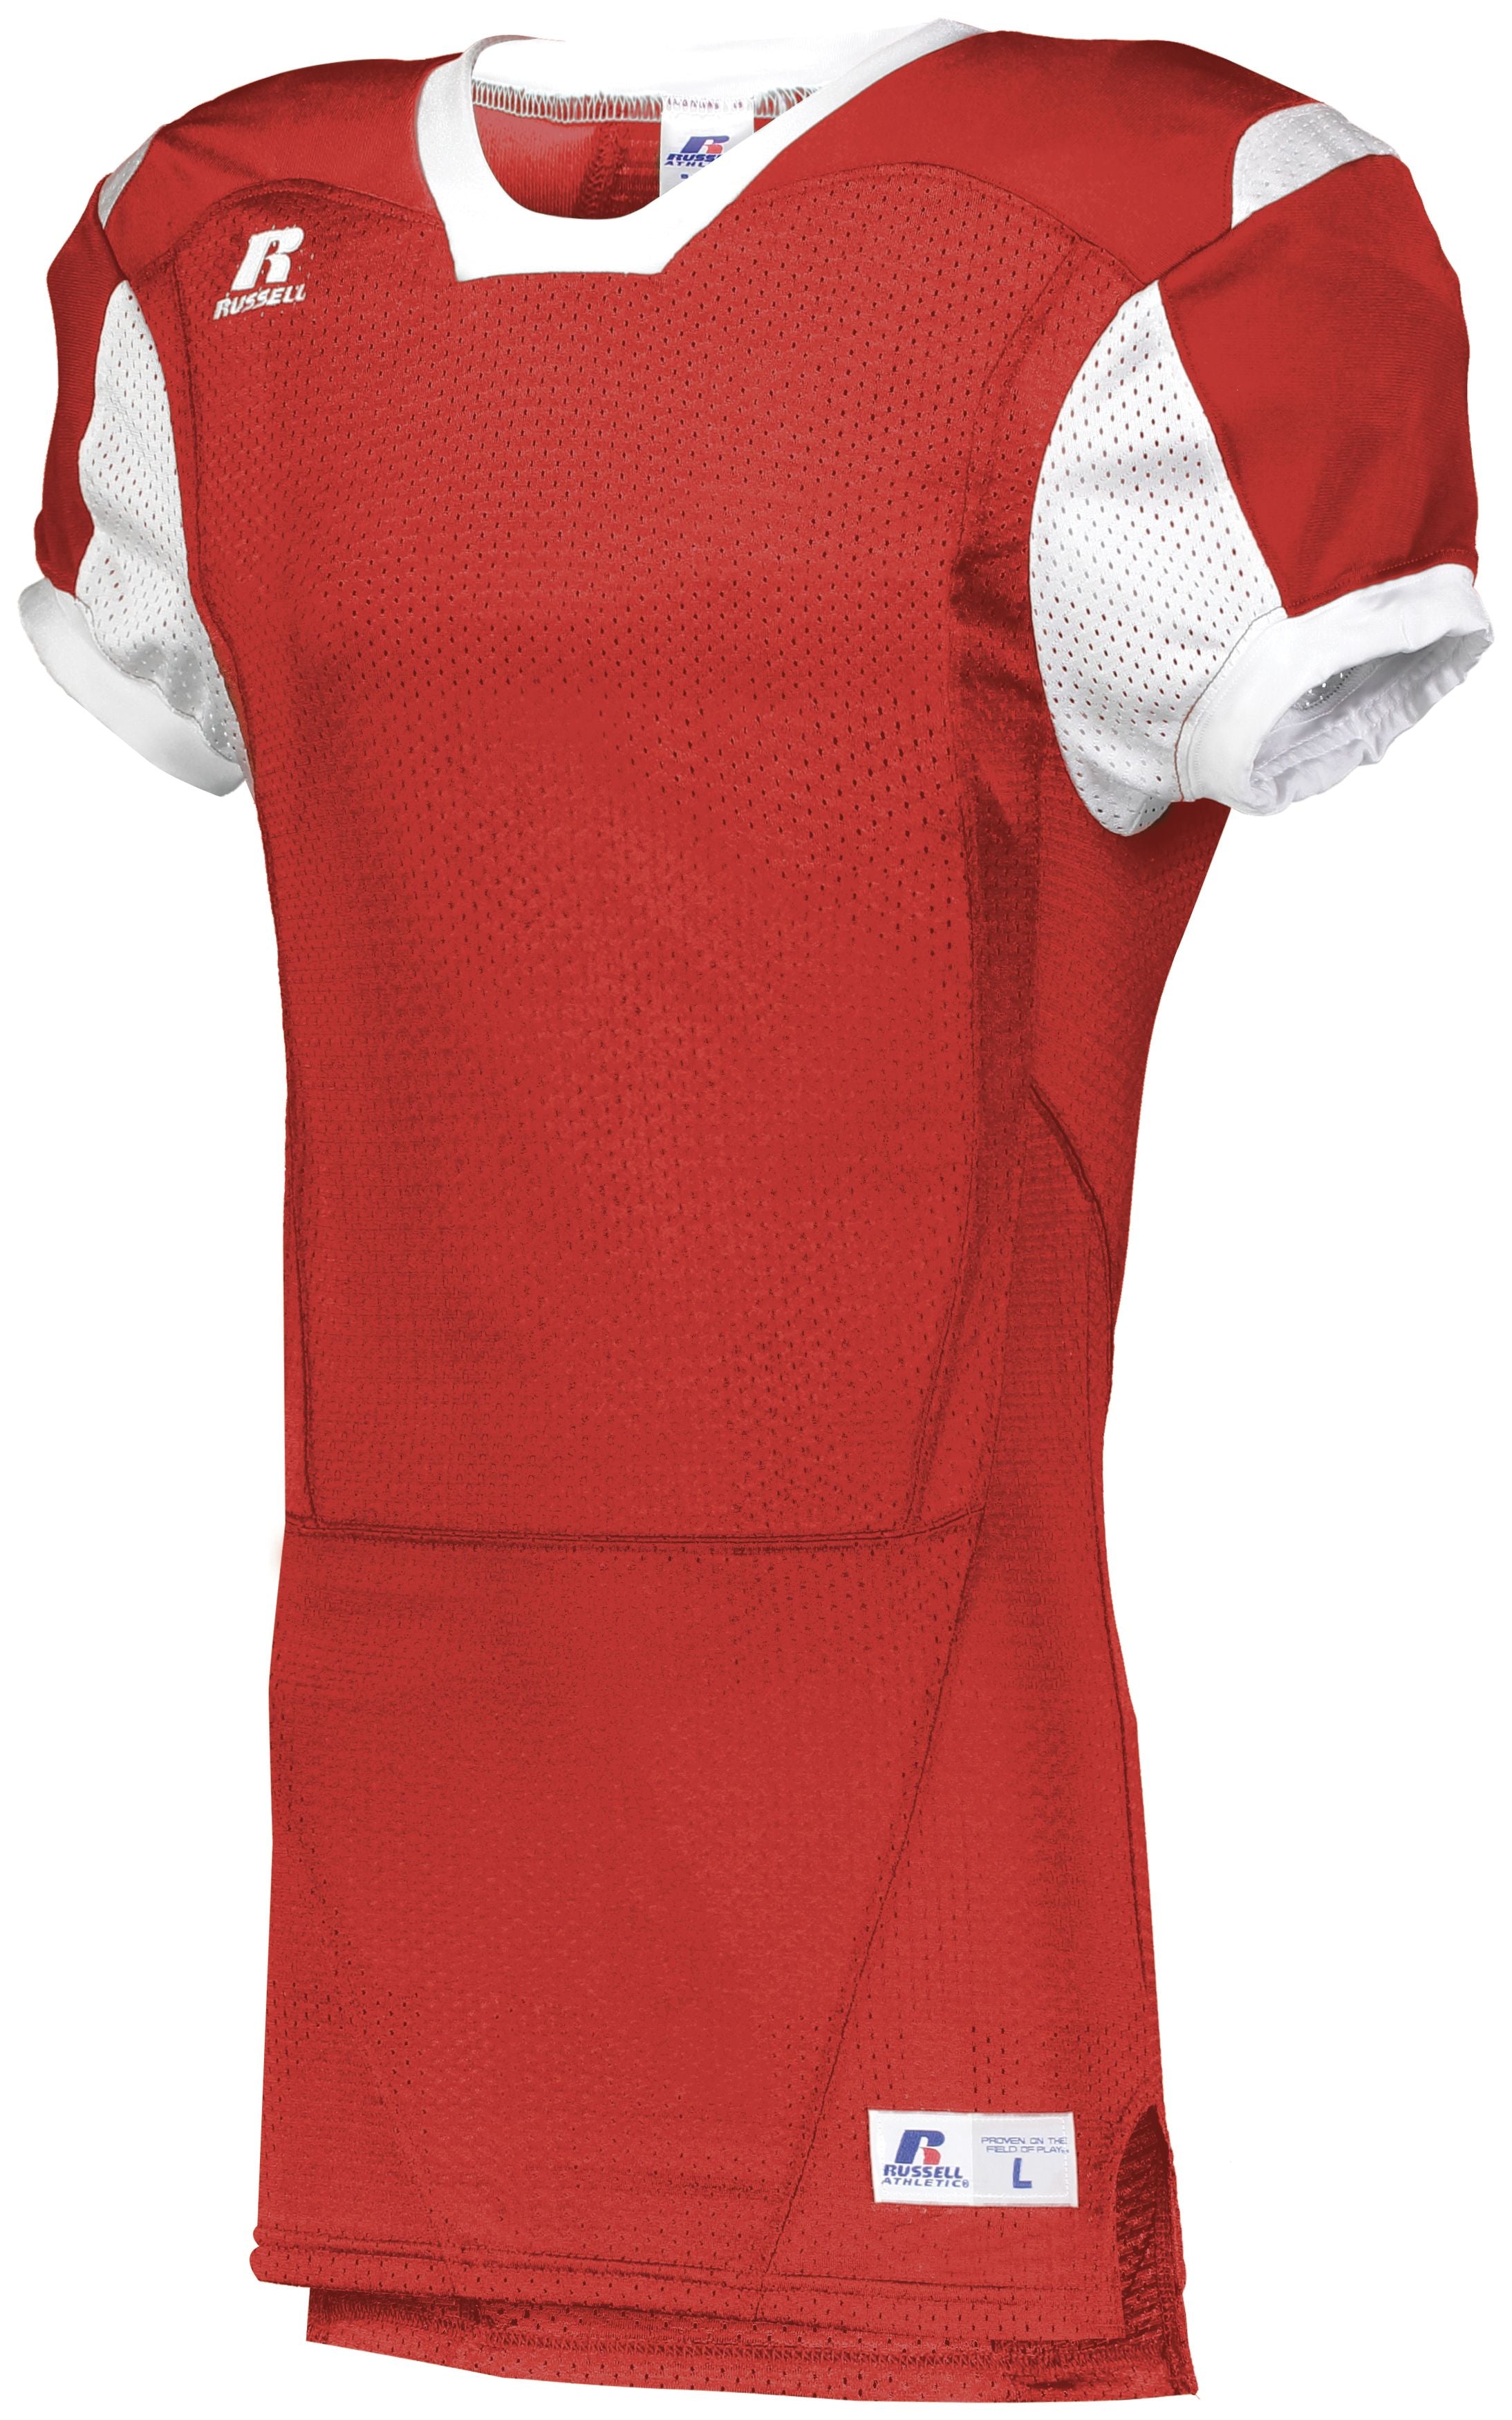 Russell Athletic Color Block Game Jersey in True Red/White  -Part of the Adult, Adult-Jersey, Football, Russell-Athletic-Products, Shirts, All-Sports, All-Sports-1 product lines at KanaleyCreations.com